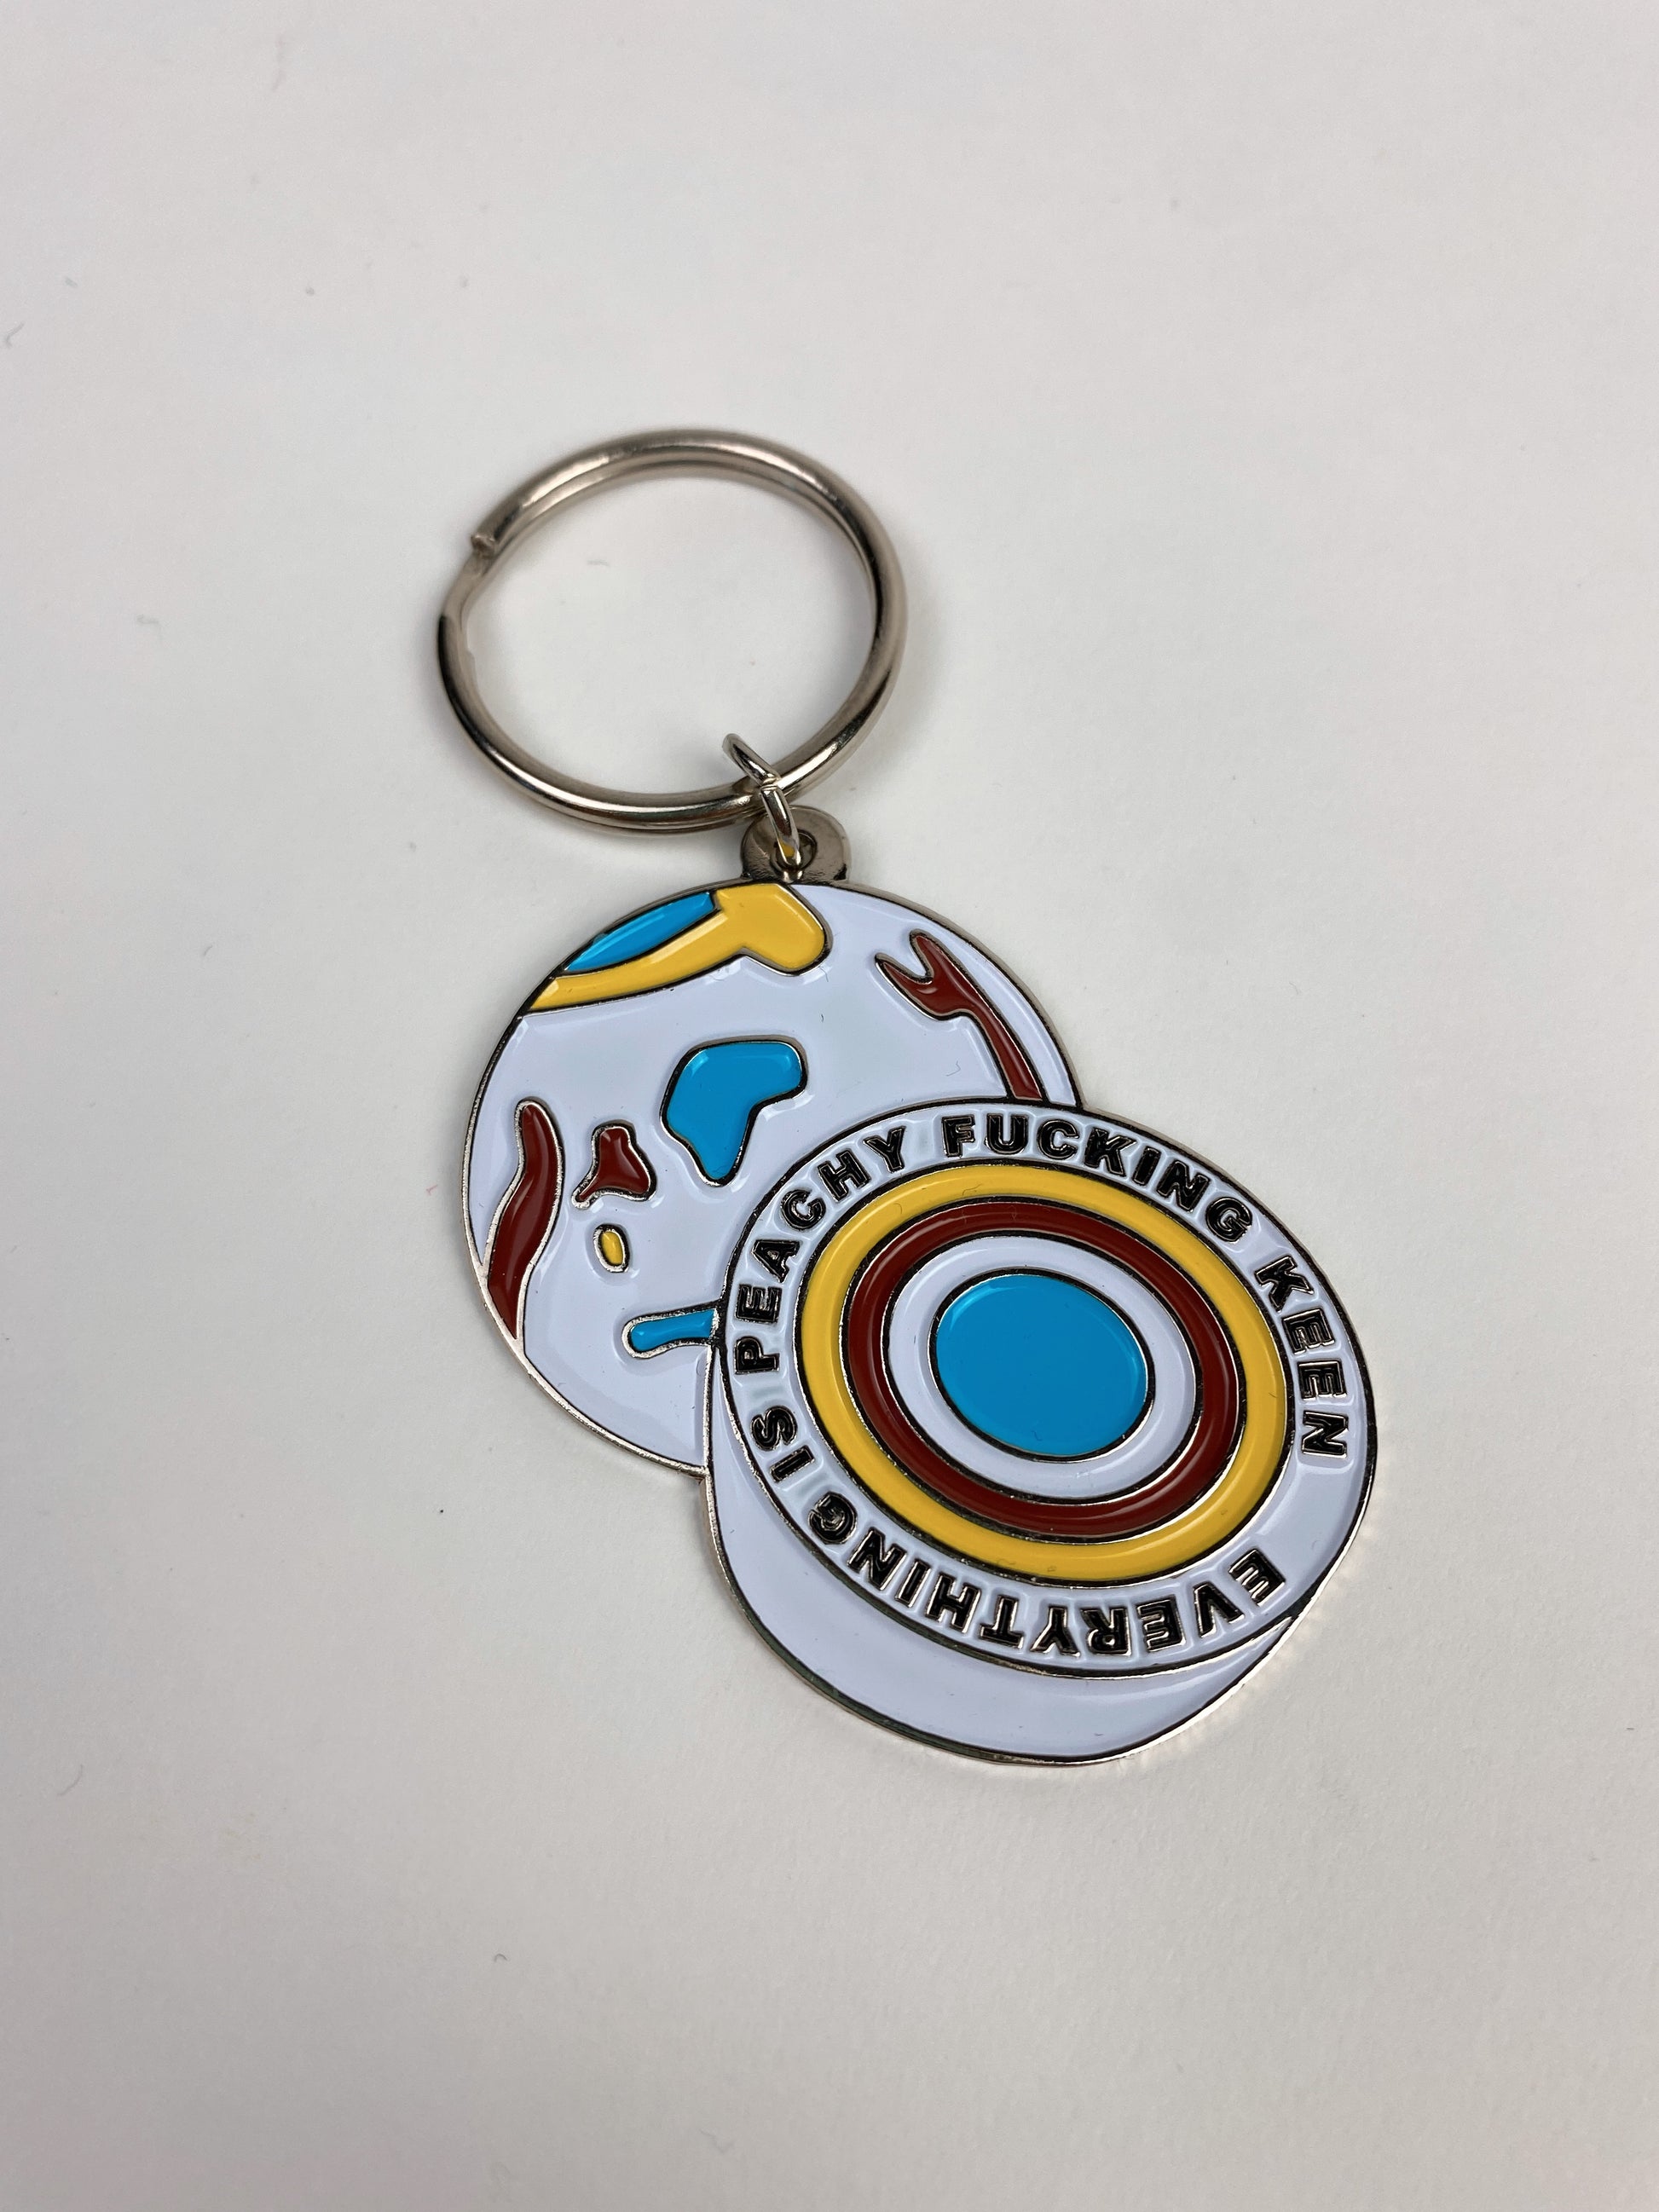 Jawbreaker Everything is Peachy F-ing Keen Key Chain - Totally Good Time